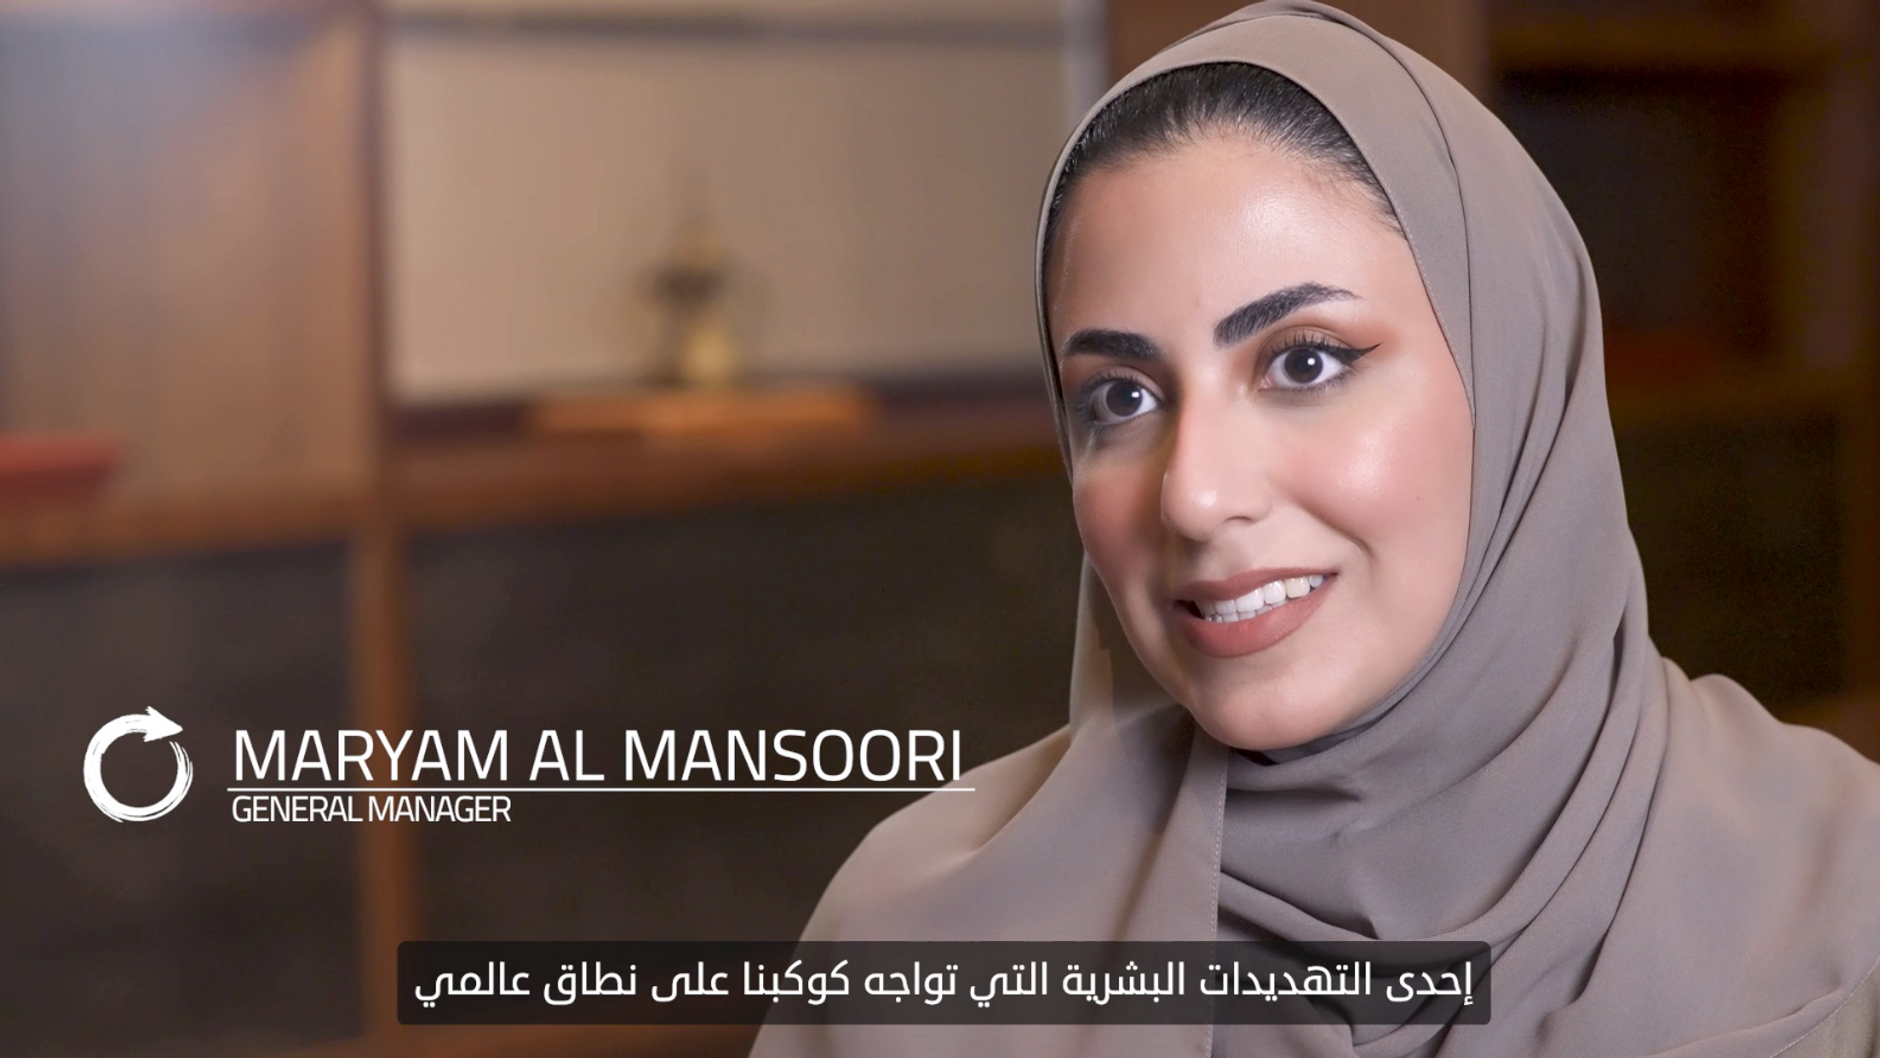 Maryam Al Mansoori - Meet Our General Manager to know more about RPX